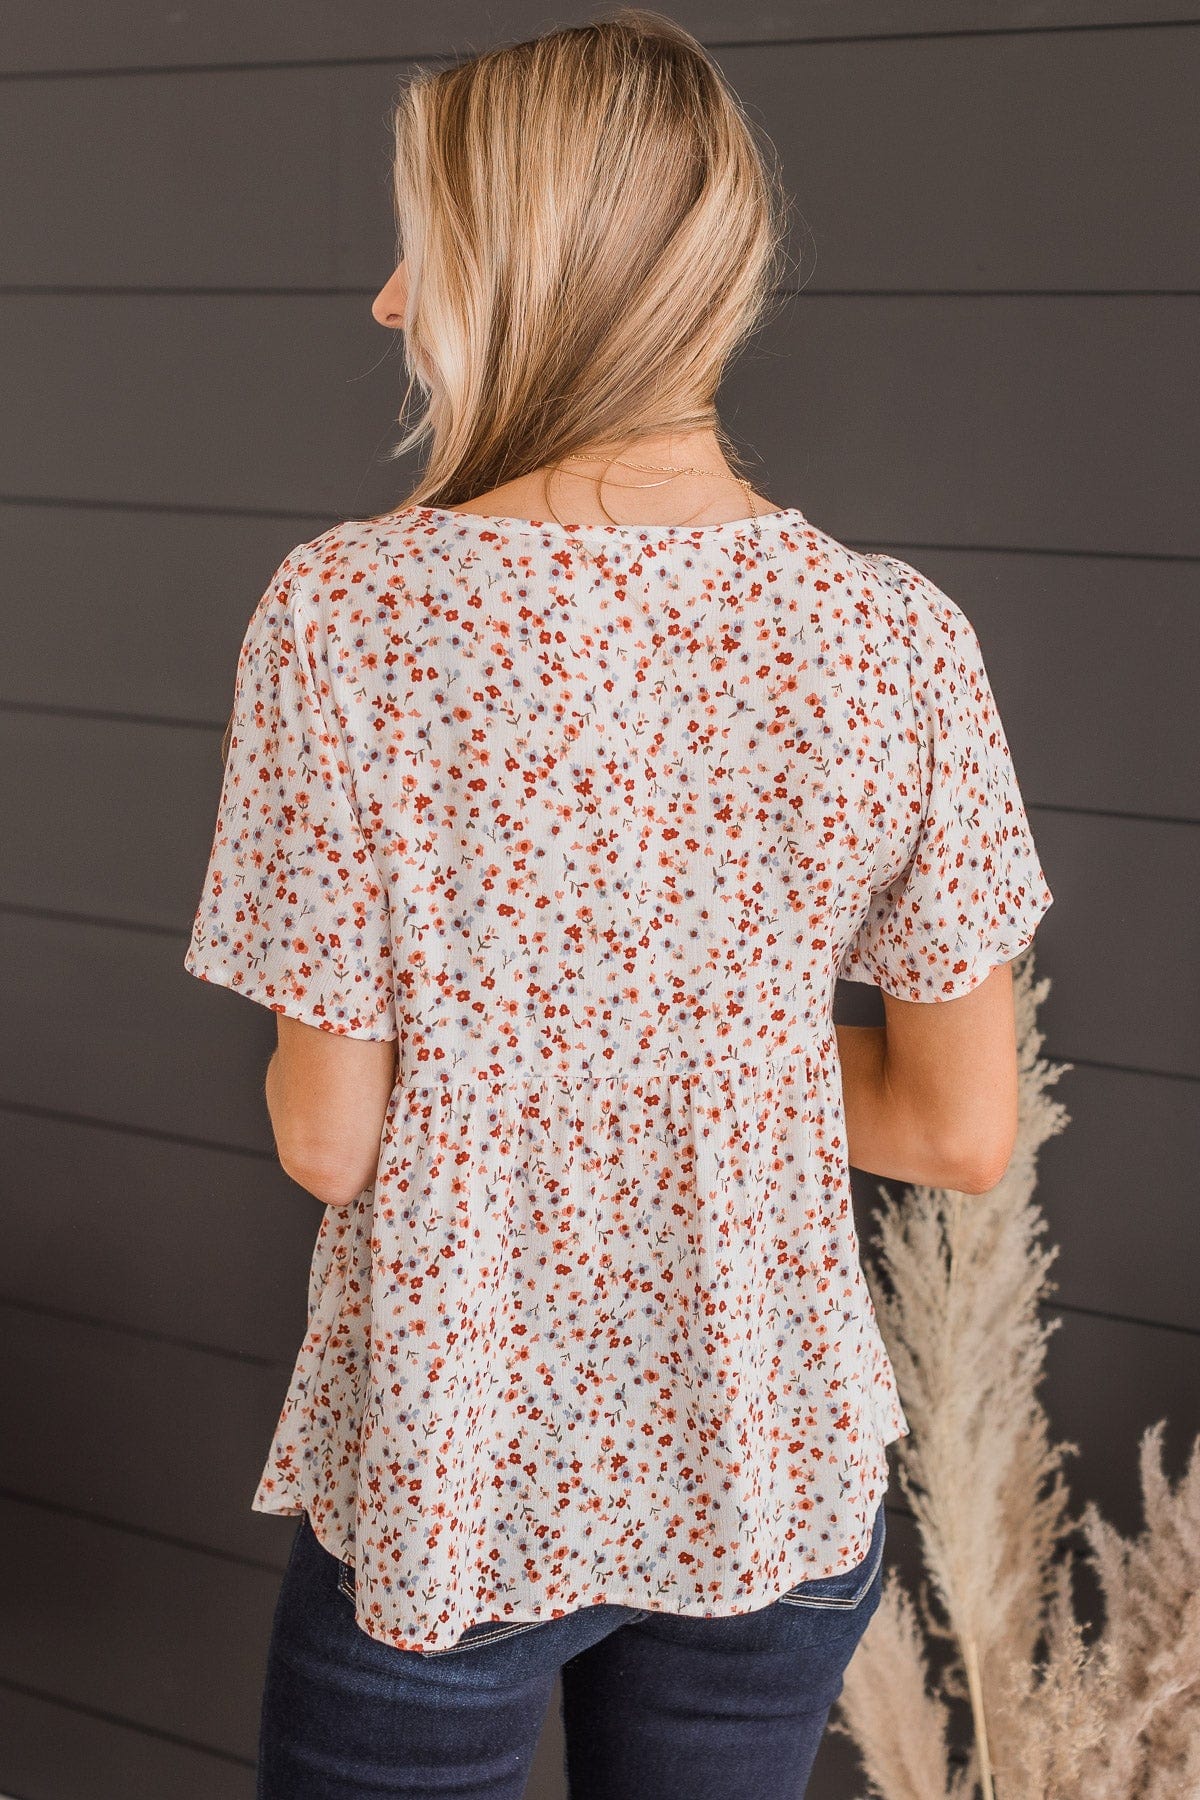 Blushing Beauty Floral Top- Ivory